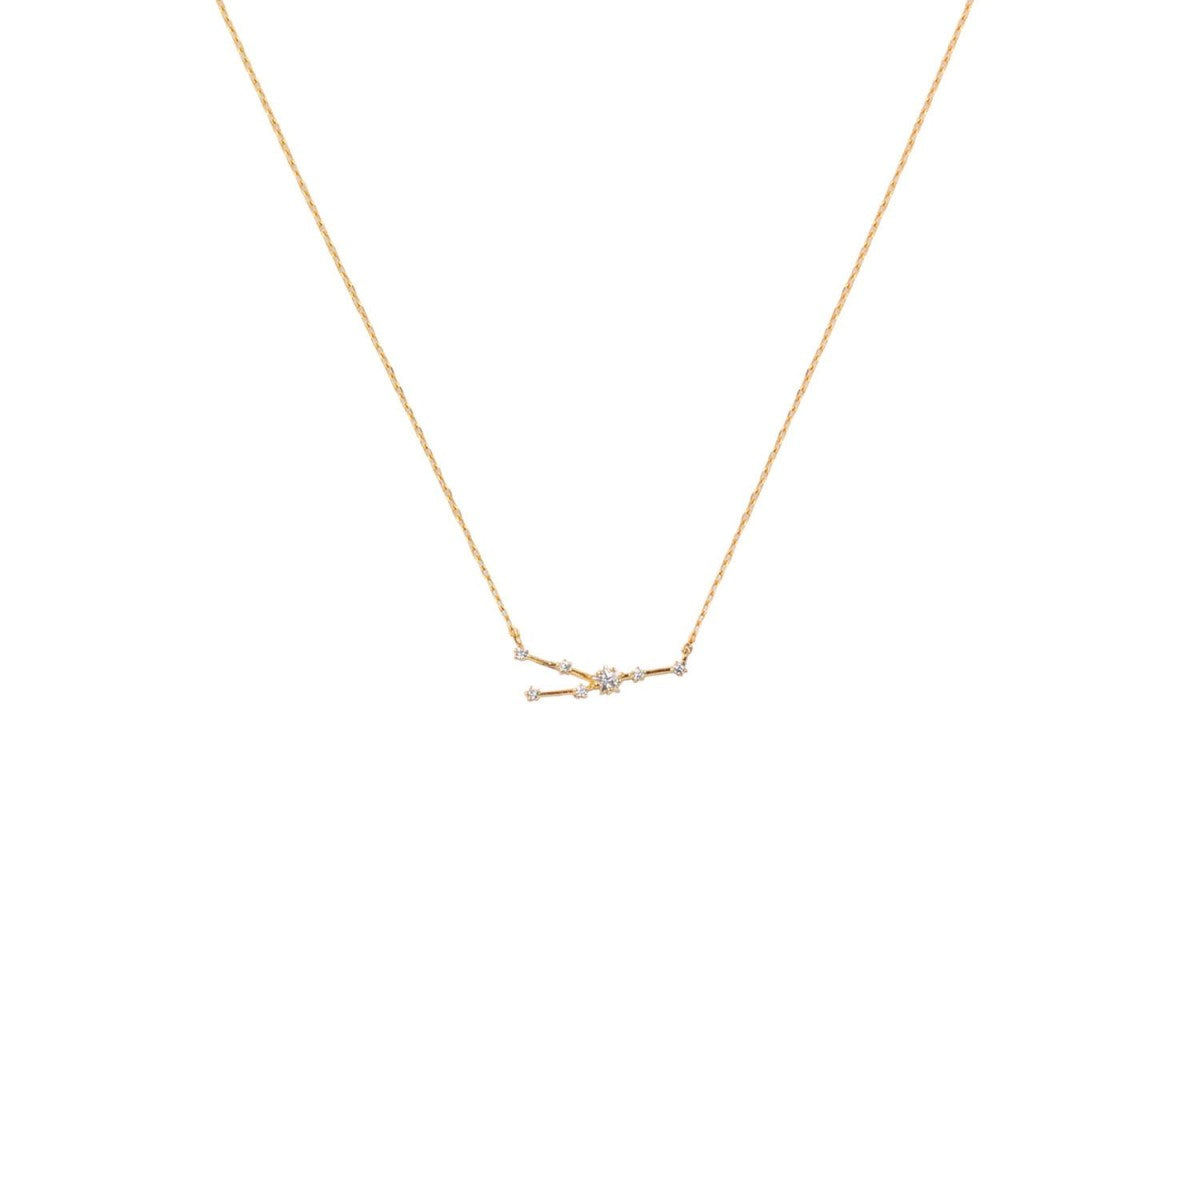 The Nadia Gold Dipped Constellation Necklace